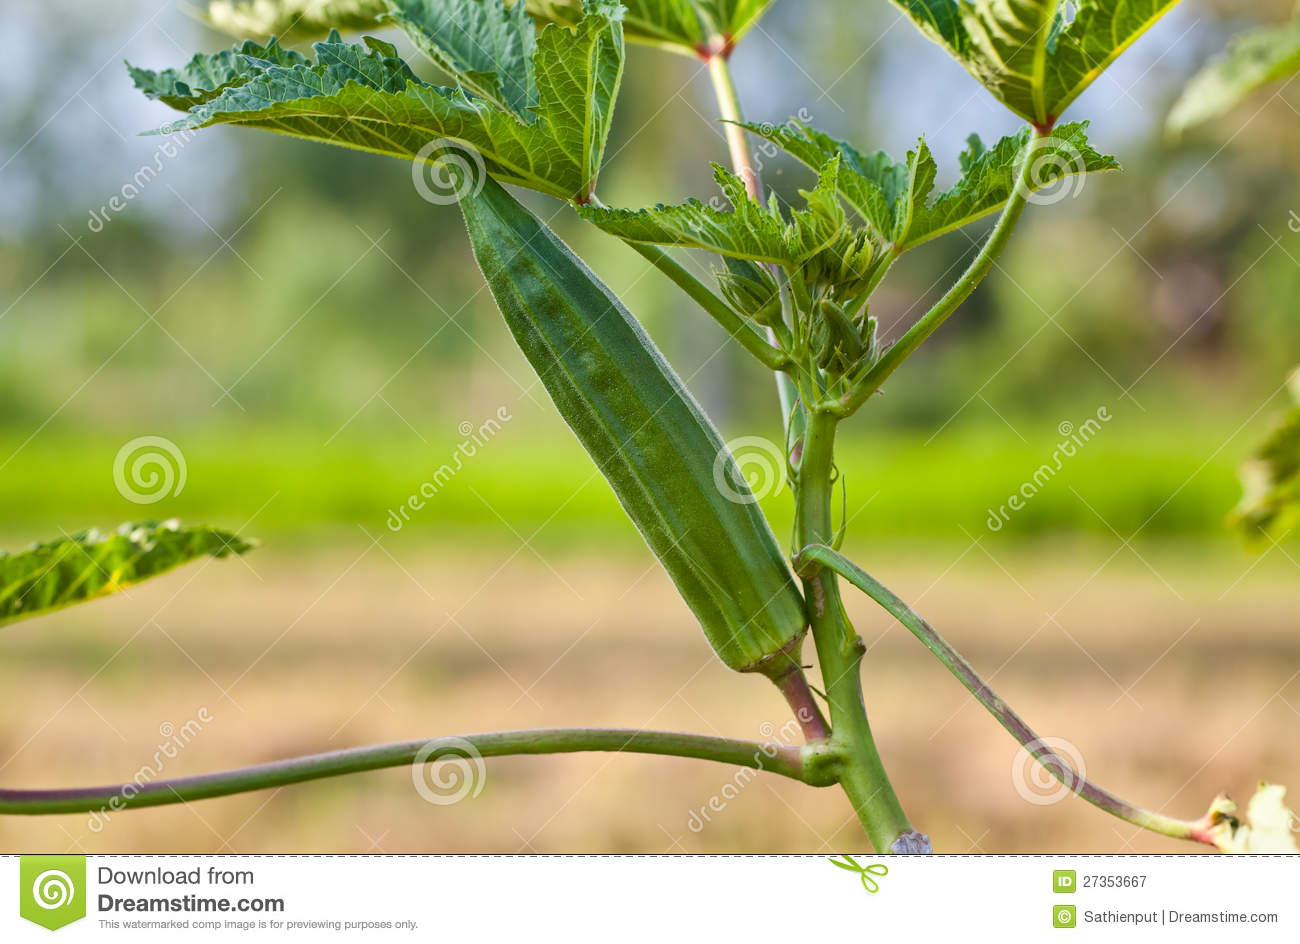 Okra On Tree In Garden Royalty Free Stock Photography   Image